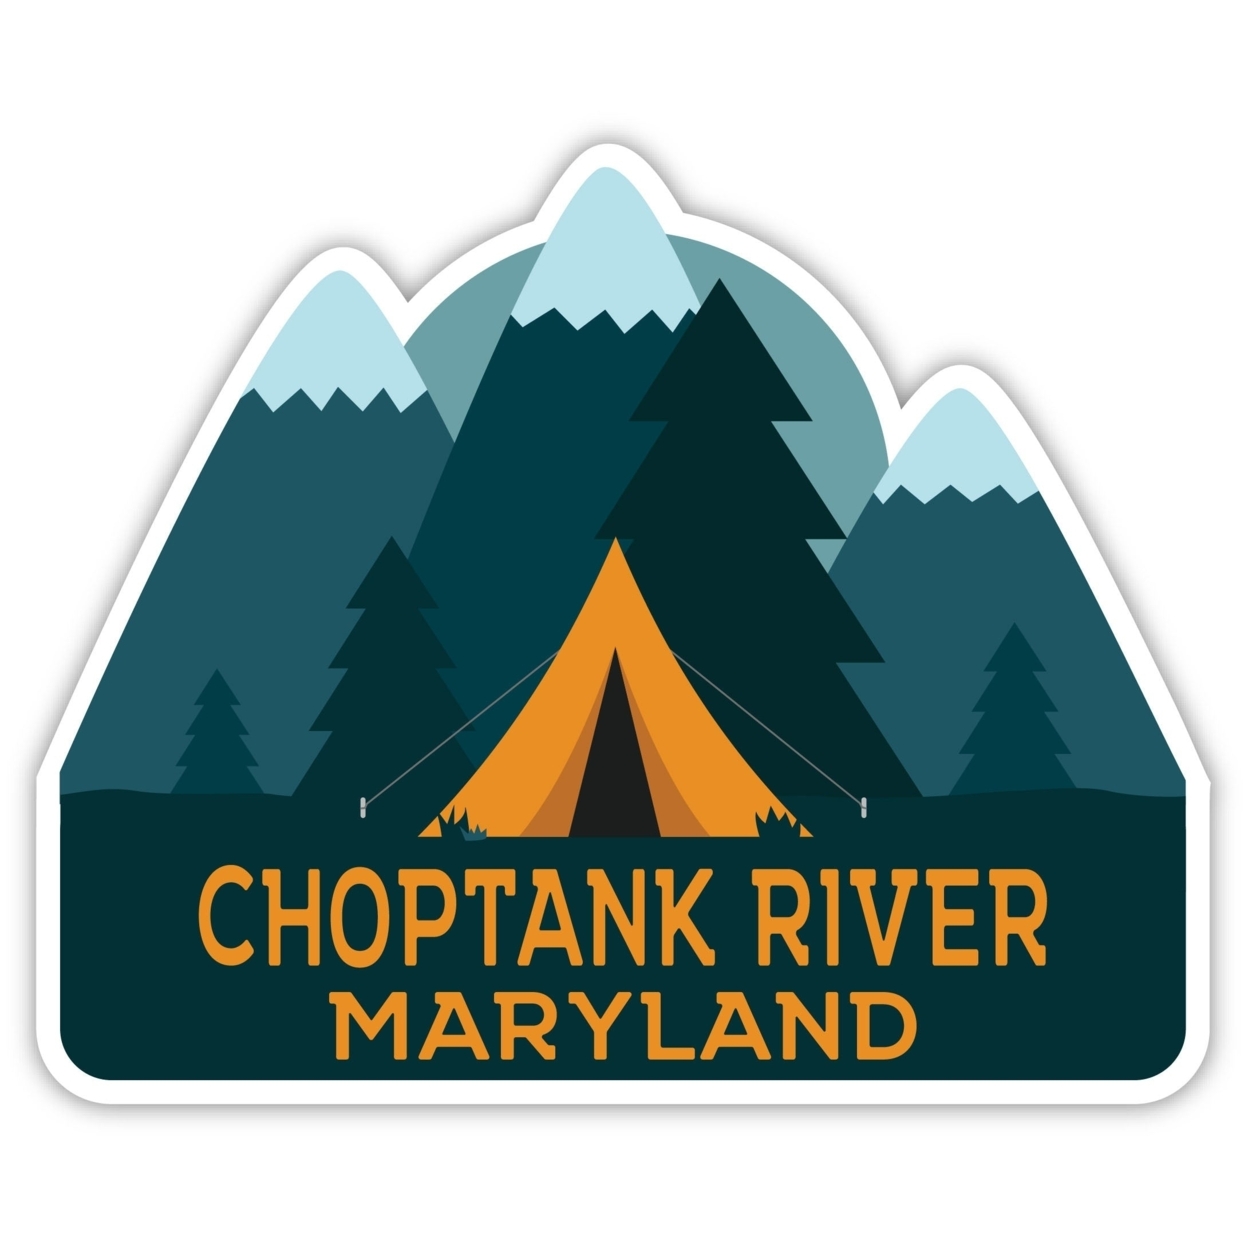 Choptank River Maryland Souvenir Decorative Stickers (Choose Theme And Size) - 4-Pack, 8-Inch, Tent